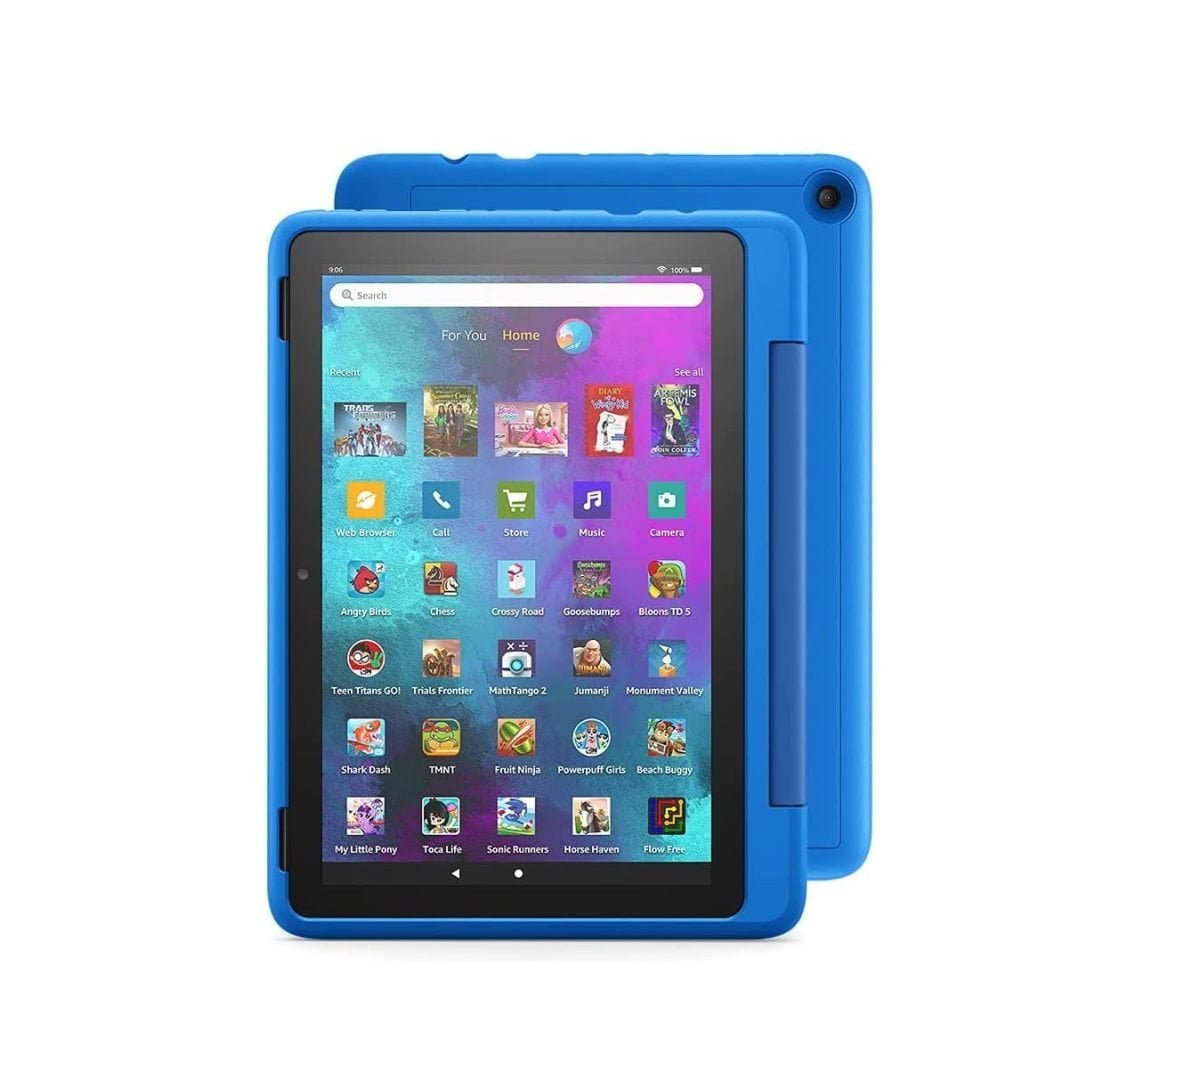 61Y1S0Qtkbs. Ac Sl1000 Amazon &Amp;Lt;H1&Amp;Gt;Fire Hd 10 Kids Pro Tablet, 10.1&Amp;Quot;, 1080P Full Hd, Ages 6–12, 32 Gb, Sky Blue&Amp;Lt;/H1&Amp;Gt; &Amp;Lt;Ul&Amp;Gt; &Amp;Lt;Li&Amp;Gt;&Amp;Lt;Span Class=&Amp;Quot;A-List-Item&Amp;Quot;&Amp;Gt; Features An Octa-Core Processor, 3 Gb Ram, 10.1&Amp;Quot; Full Hd Display, Dual Cameras, Usb-C (2.0) Port, And Up To 1 Tb Of Expandable Storage. Screen Made With Strengthened Aluminosilicate Glass. &Amp;Lt;/Span&Amp;Gt;&Amp;Lt;/Li&Amp;Gt; &Amp;Lt;Li&Amp;Gt;&Amp;Lt;Span Class=&Amp;Quot;A-List-Item&Amp;Quot;&Amp;Gt;Kids Can Request Apps, While Parents Approve Purchases And Downloads. Plus, Parents Can Add Access To More Apps Like Minecraft And Zoom. &Amp;Lt;/Span&Amp;Gt;&Amp;Lt;/Li&Amp;Gt; &Amp;Lt;Li&Amp;Gt;&Amp;Lt;Span Class=&Amp;Quot;A-List-Item&Amp;Quot;&Amp;Gt; The Web Browser Comes With Built-In Controls Designed To Help Filter Out Inappropriate Sites And Let Parents Add Or Block Specific Websites At Any Time. &Amp;Lt;/Span&Amp;Gt;&Amp;Lt;/Li&Amp;Gt; &Amp;Lt;Li&Amp;Gt;&Amp;Lt;Span Class=&Amp;Quot;A-List-Item&Amp;Quot;&Amp;Gt; Stay In Touch – Kids Can Send Announcements And Make Voice And Video Calls Over Wifi To Approved Contacts With An Alexa-Enabled Device Or The Alexa App. &Amp;Lt;/Span&Amp;Gt;&Amp;Lt;/Li&Amp;Gt; &Amp;Lt;/Ul&Amp;Gt; Fire Hd 10 Fire Hd 10 Kids Pro Tablet, 10.1&Amp;Quot;, 1080P Full Hd 11Th Generation, Ages 6–12, 32 Gb, Sky Blue